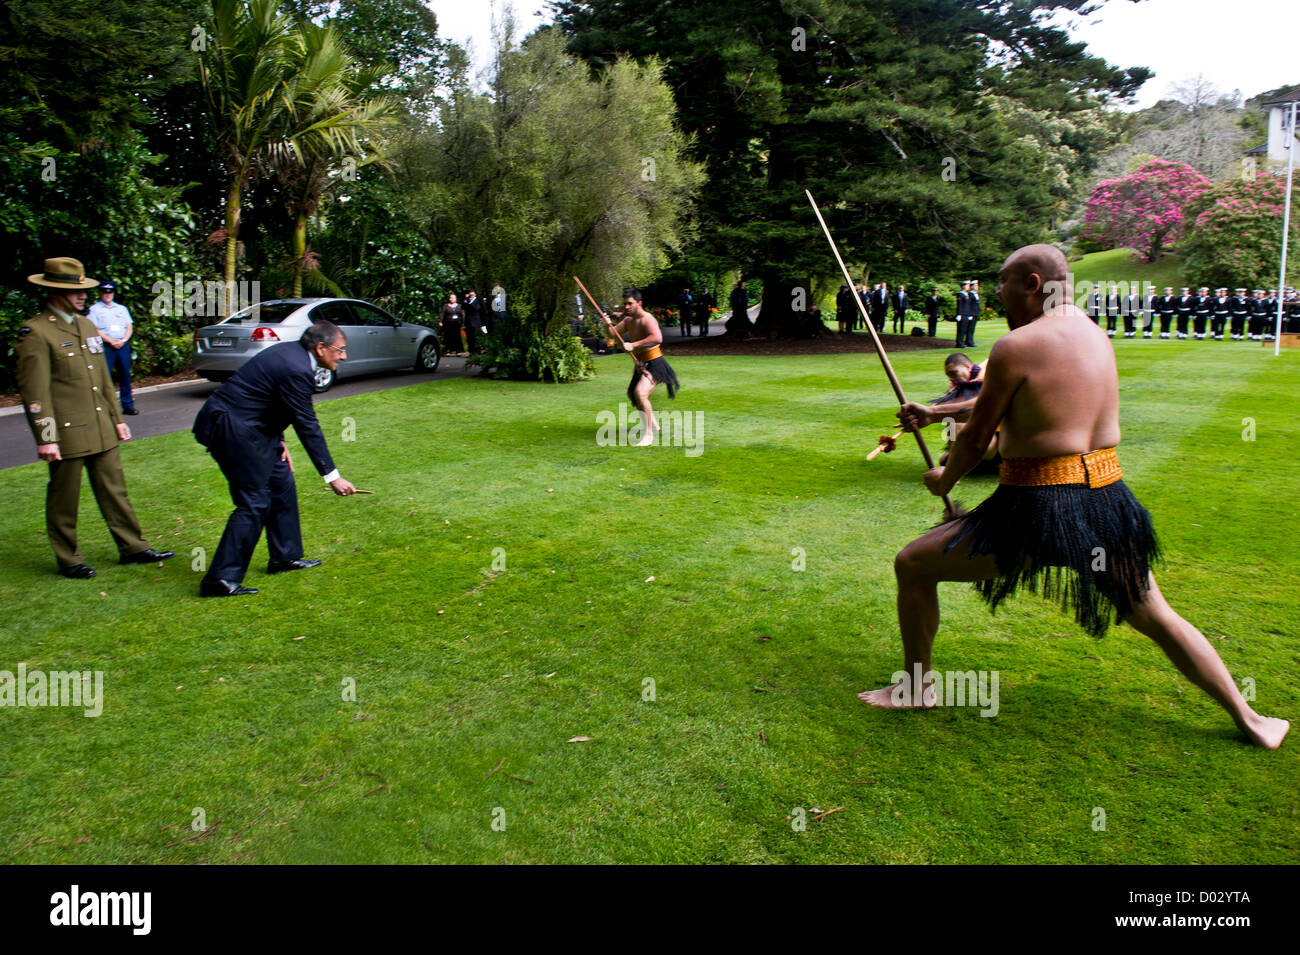 Secretary of Defense Leon Panetta is issued a wero, or challenge by Maori warriors during a Powhiri ceremony September 21, 2012 while visiting Auckland, New Zealand. Panetta picked up the rakau tapu, or dart while keeping eye contact with the warrior. The ceremony is an ancient Maori tradition used to determine if visitors came in peace or with hostile intent. Stock Photo